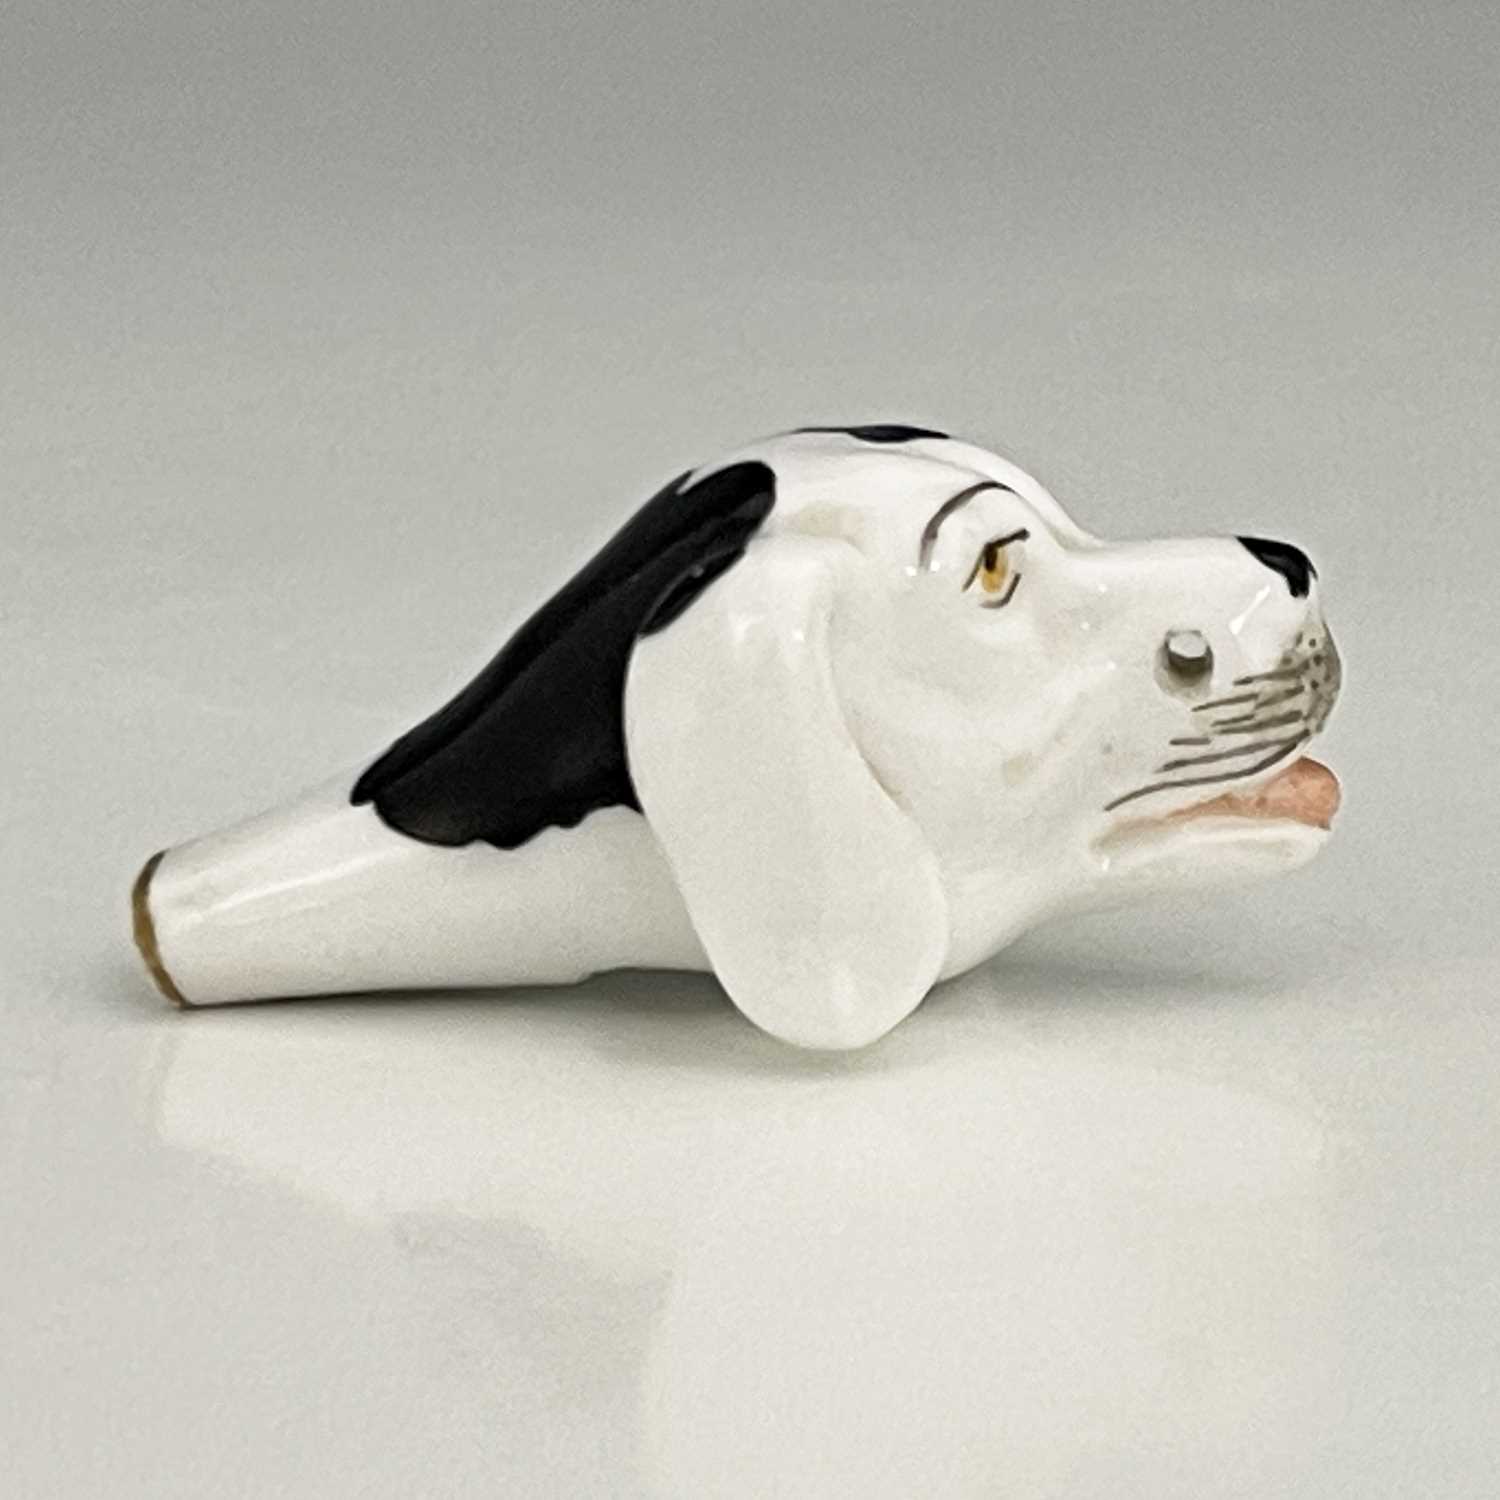 A Staffordshire porcelain novelty dog whistle, 19th century, modelled in the form of a spaniel's